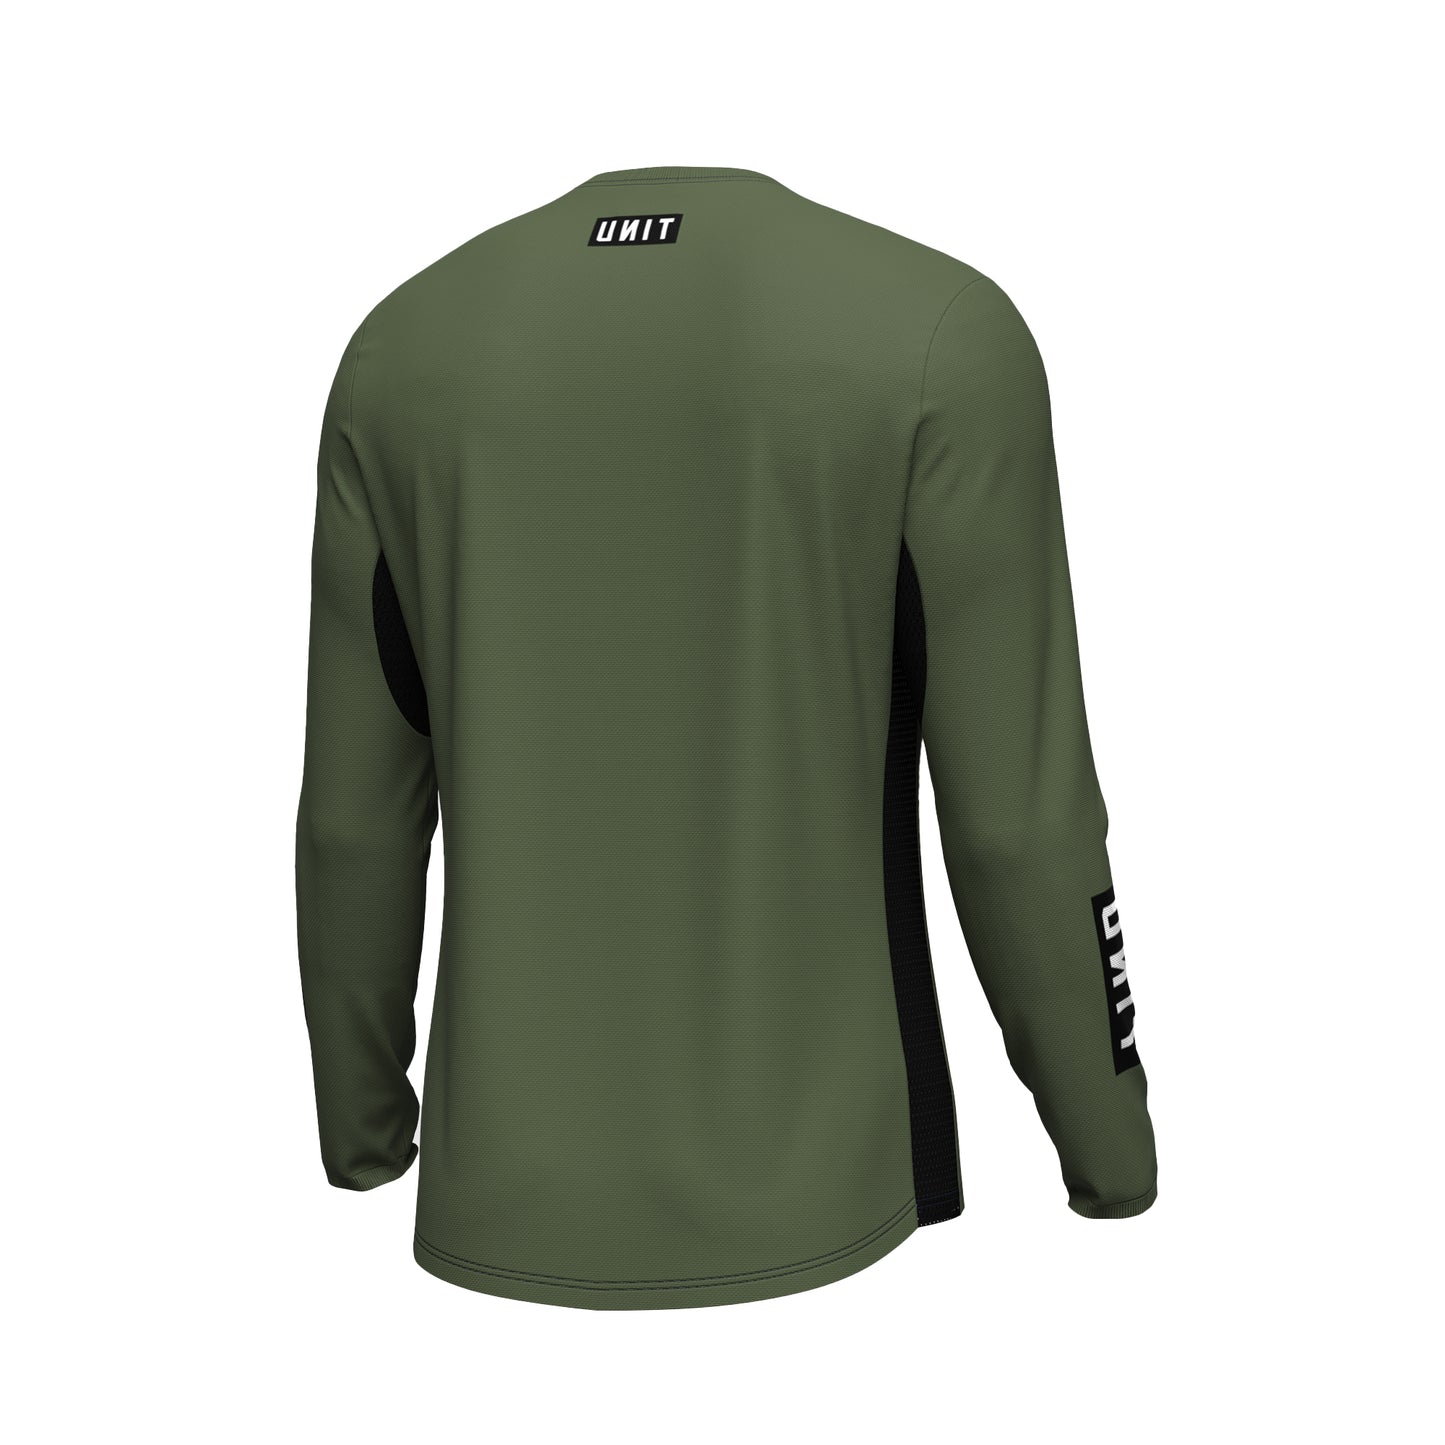 Unit Men's Long Sleeve Jersey - L - Stack - Military - Image 3